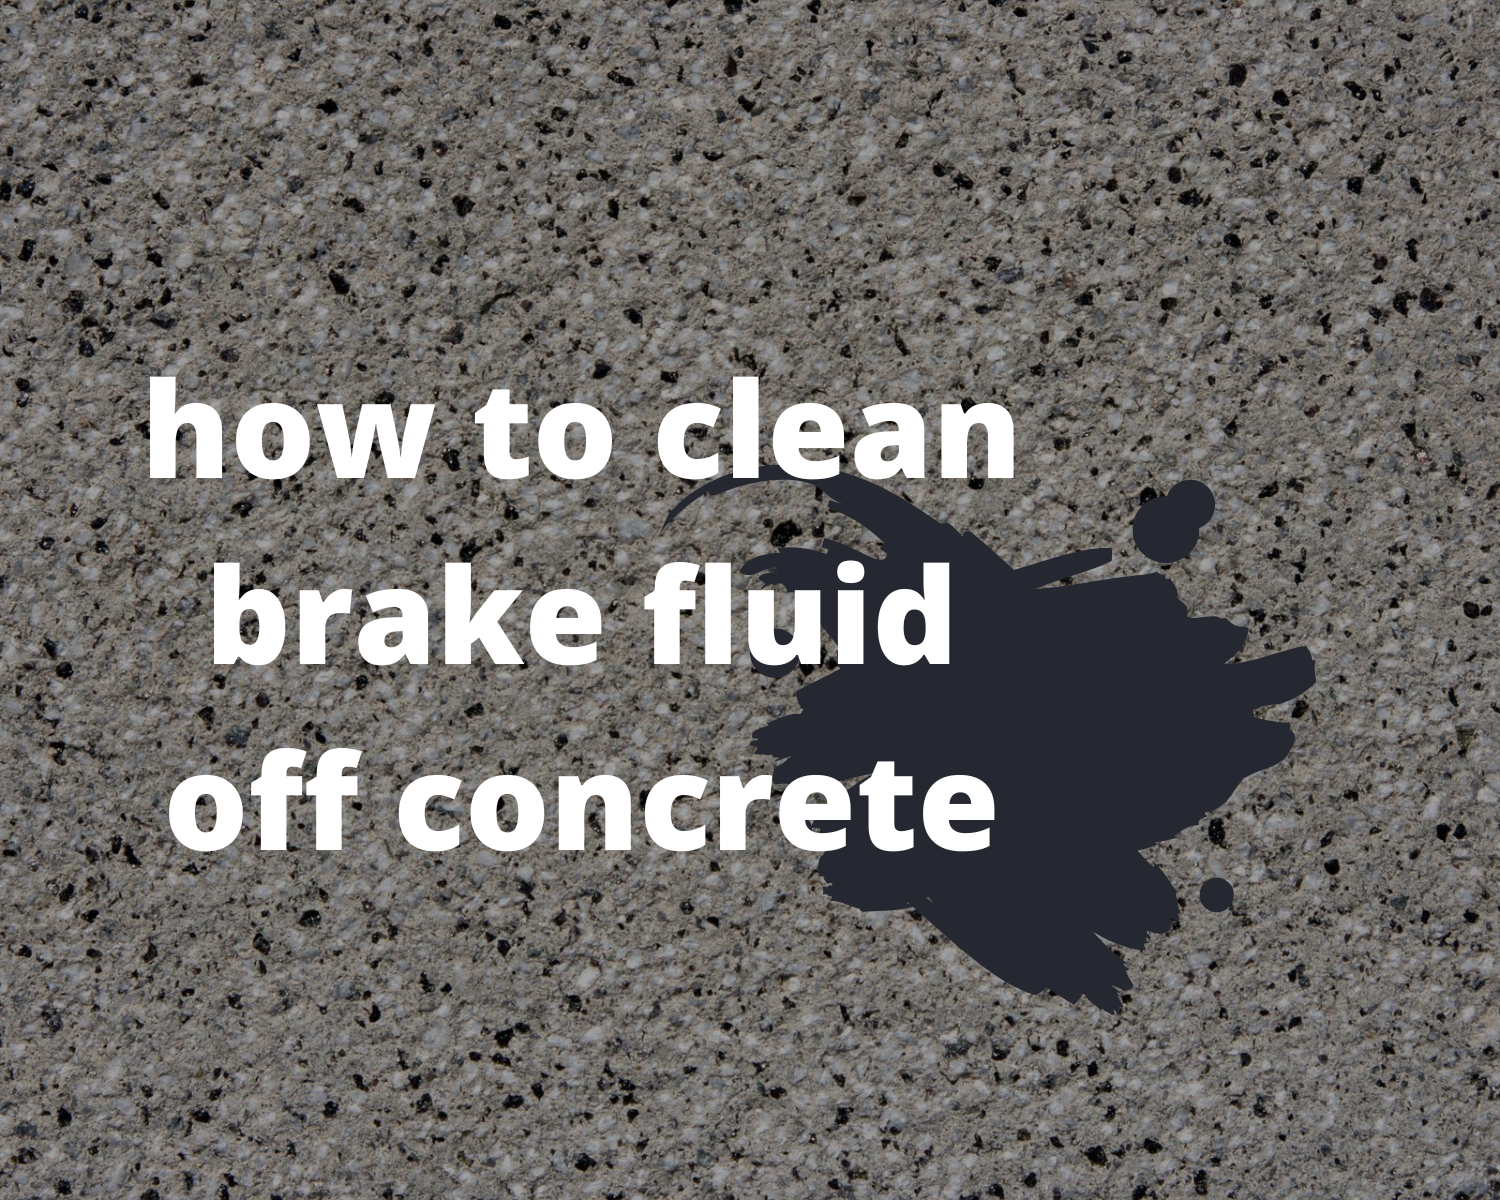 how to clean brake fluid off concrete?